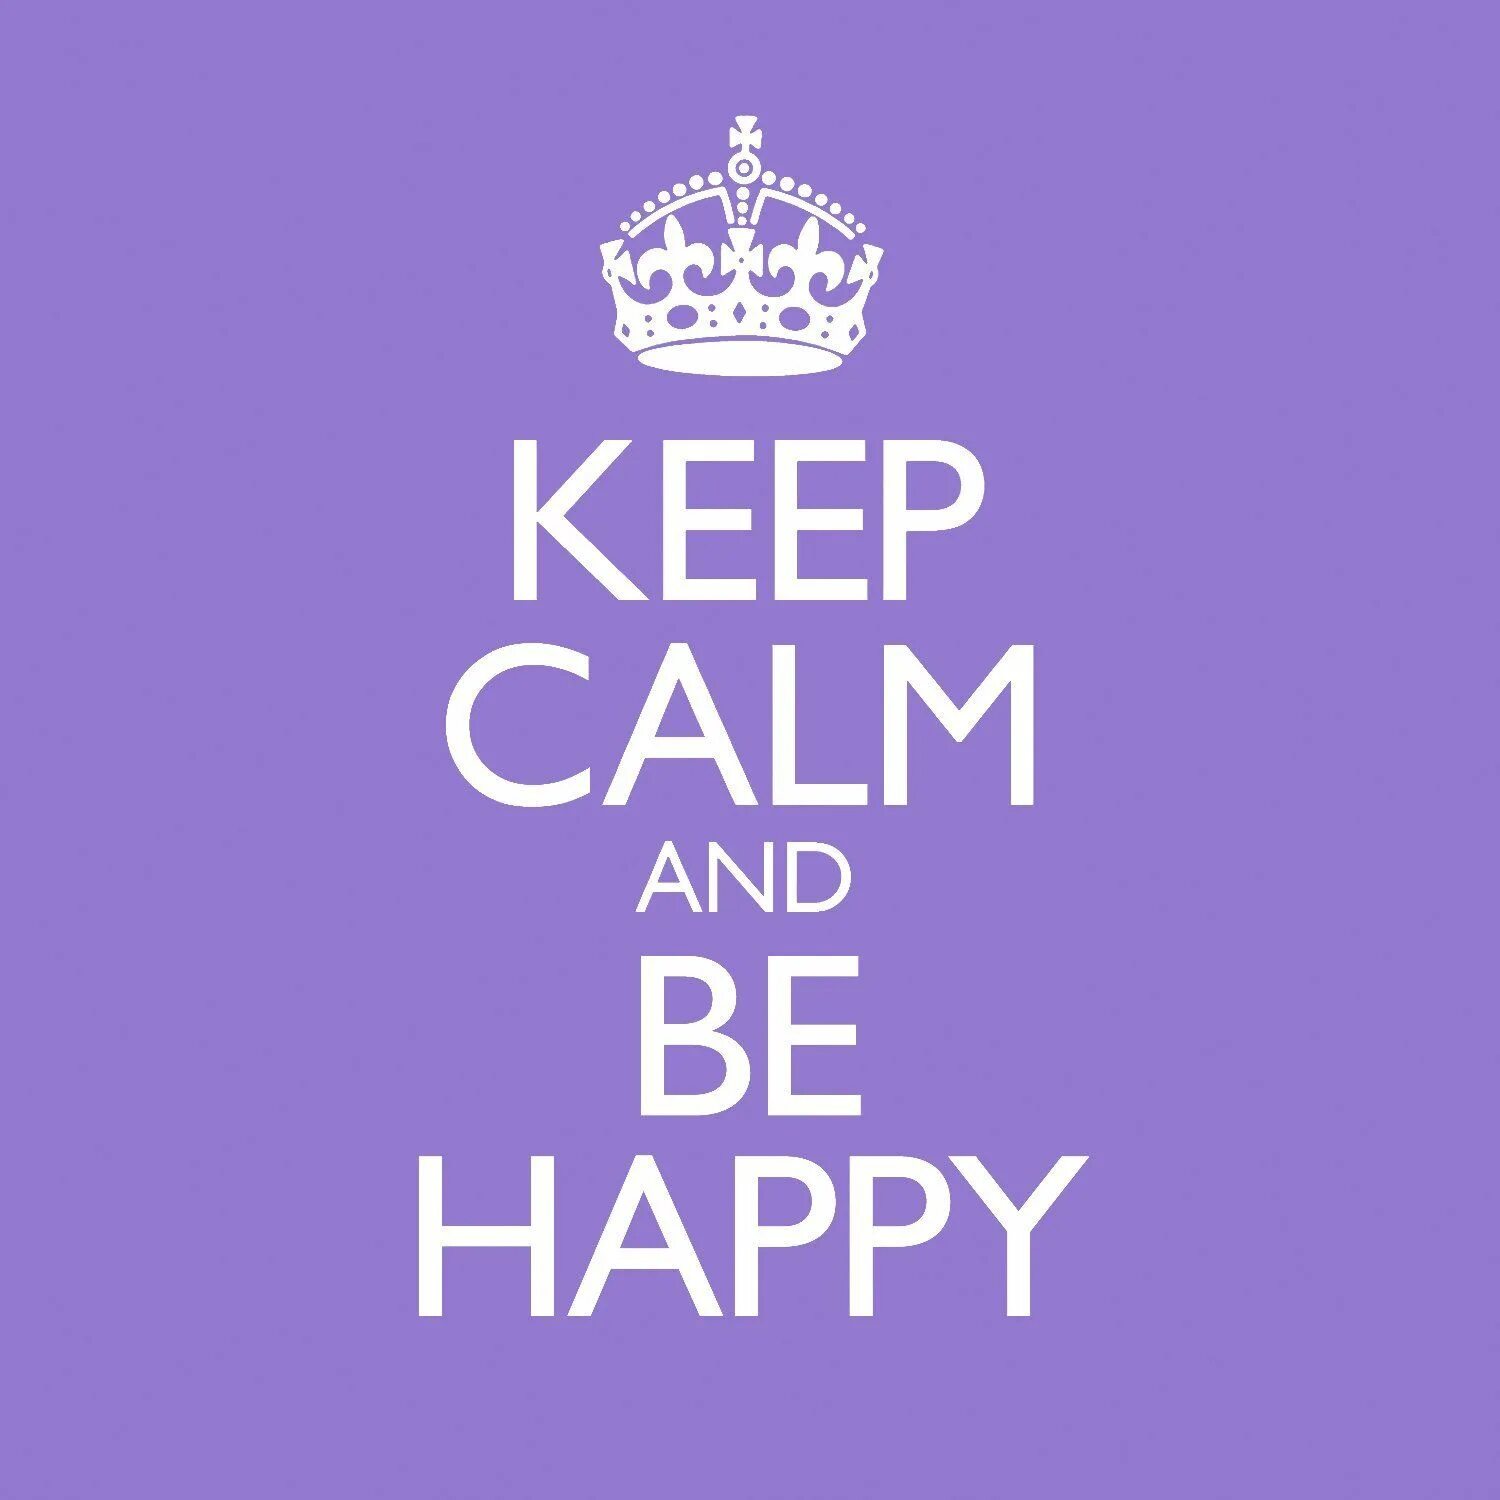 Keep Calm. Keep Calm and be Happy. Be Calm. Keep Calm and Relax. Включи be happy